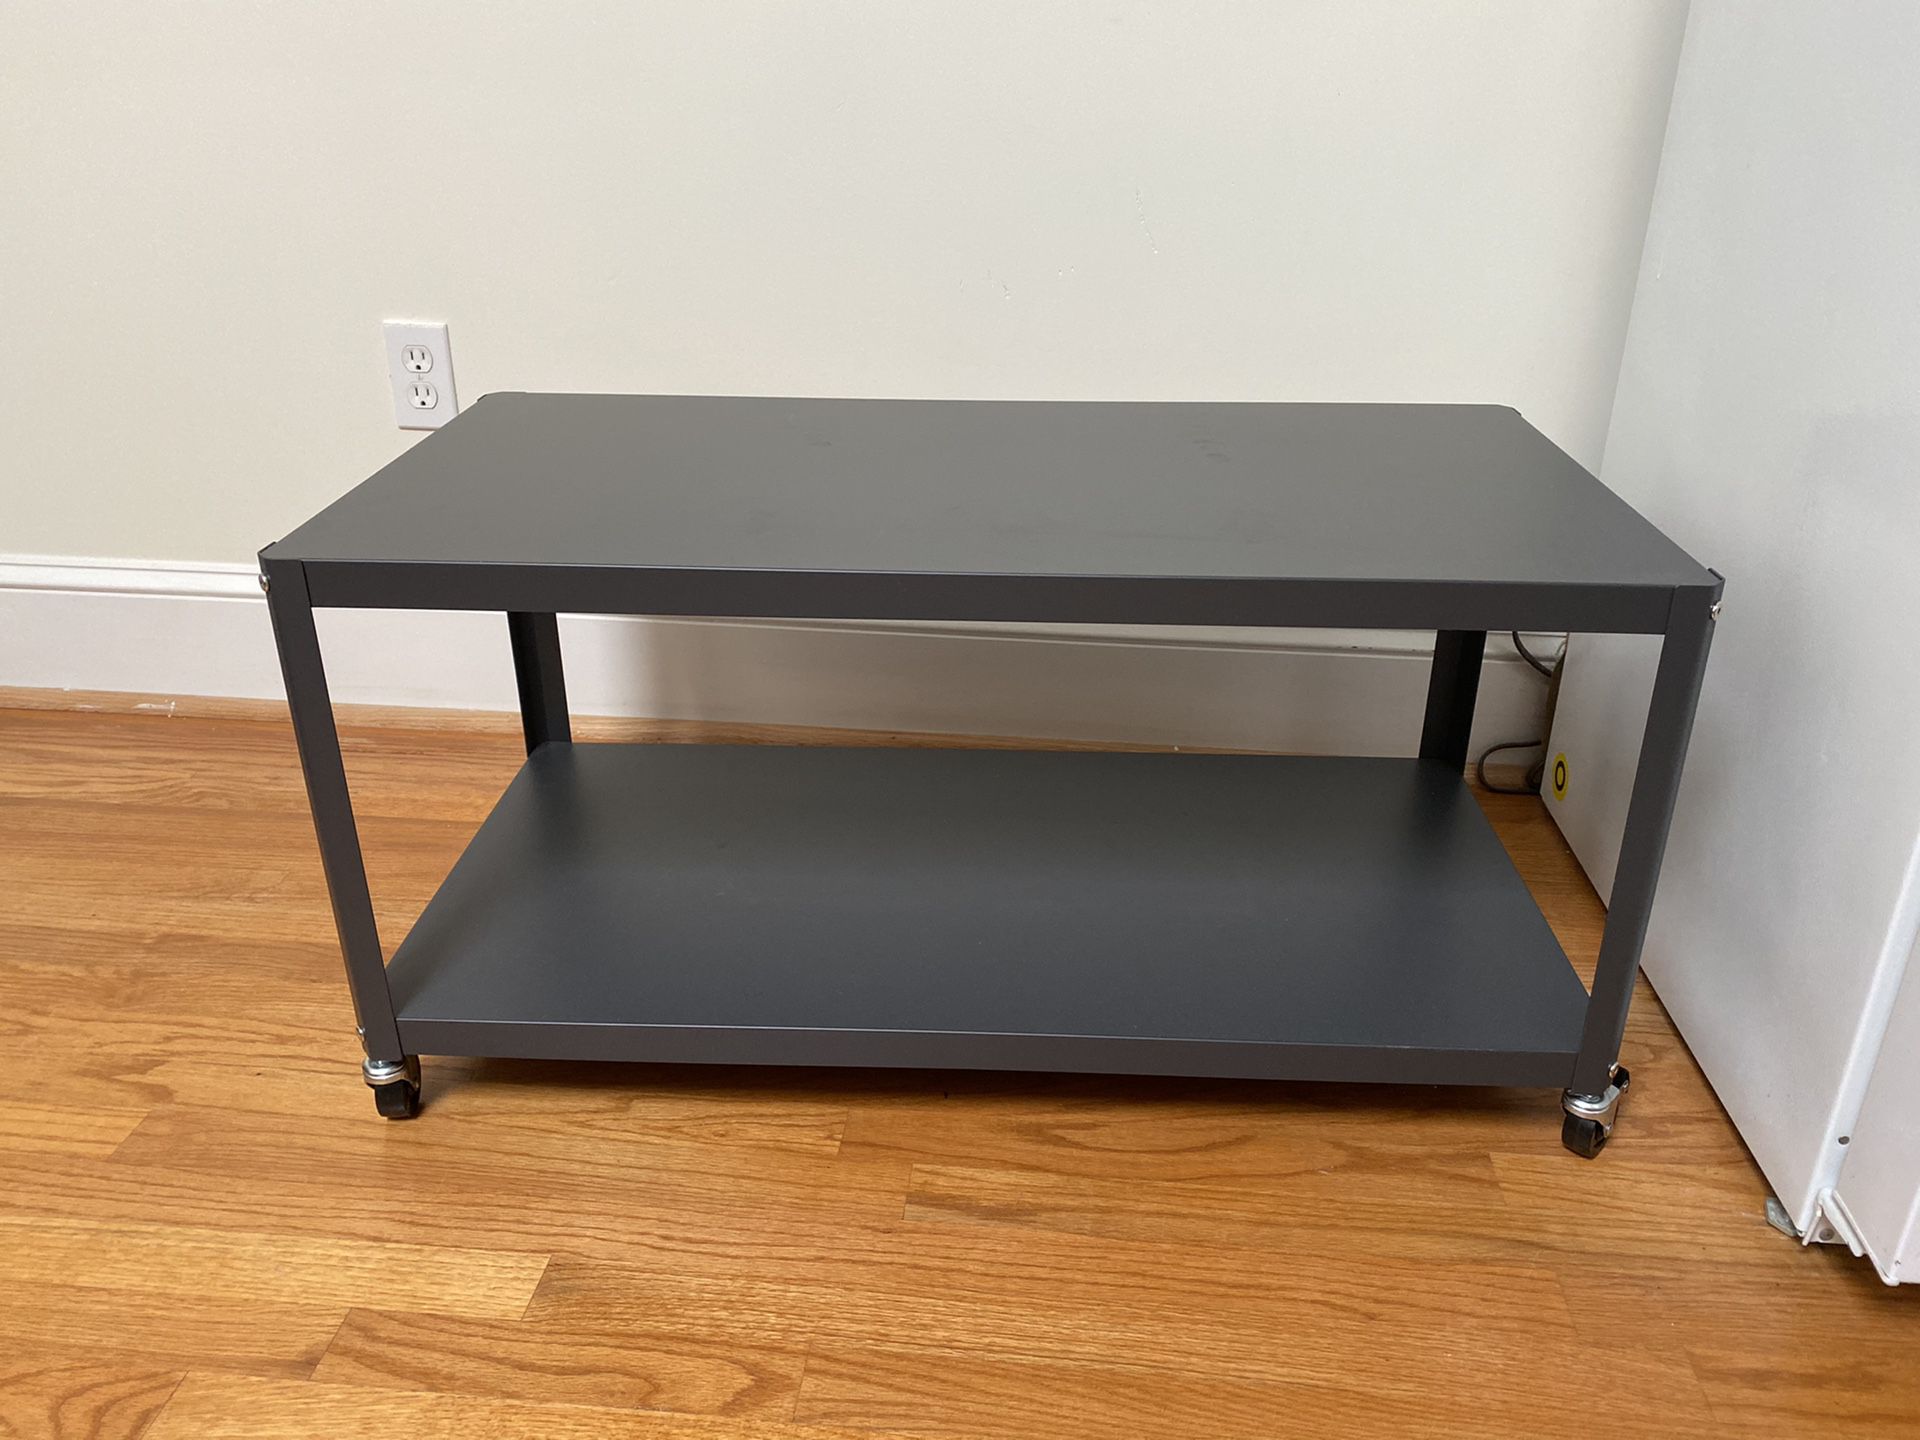 Metal coffee table on wheels / tv stand / multi cart- 2 months old